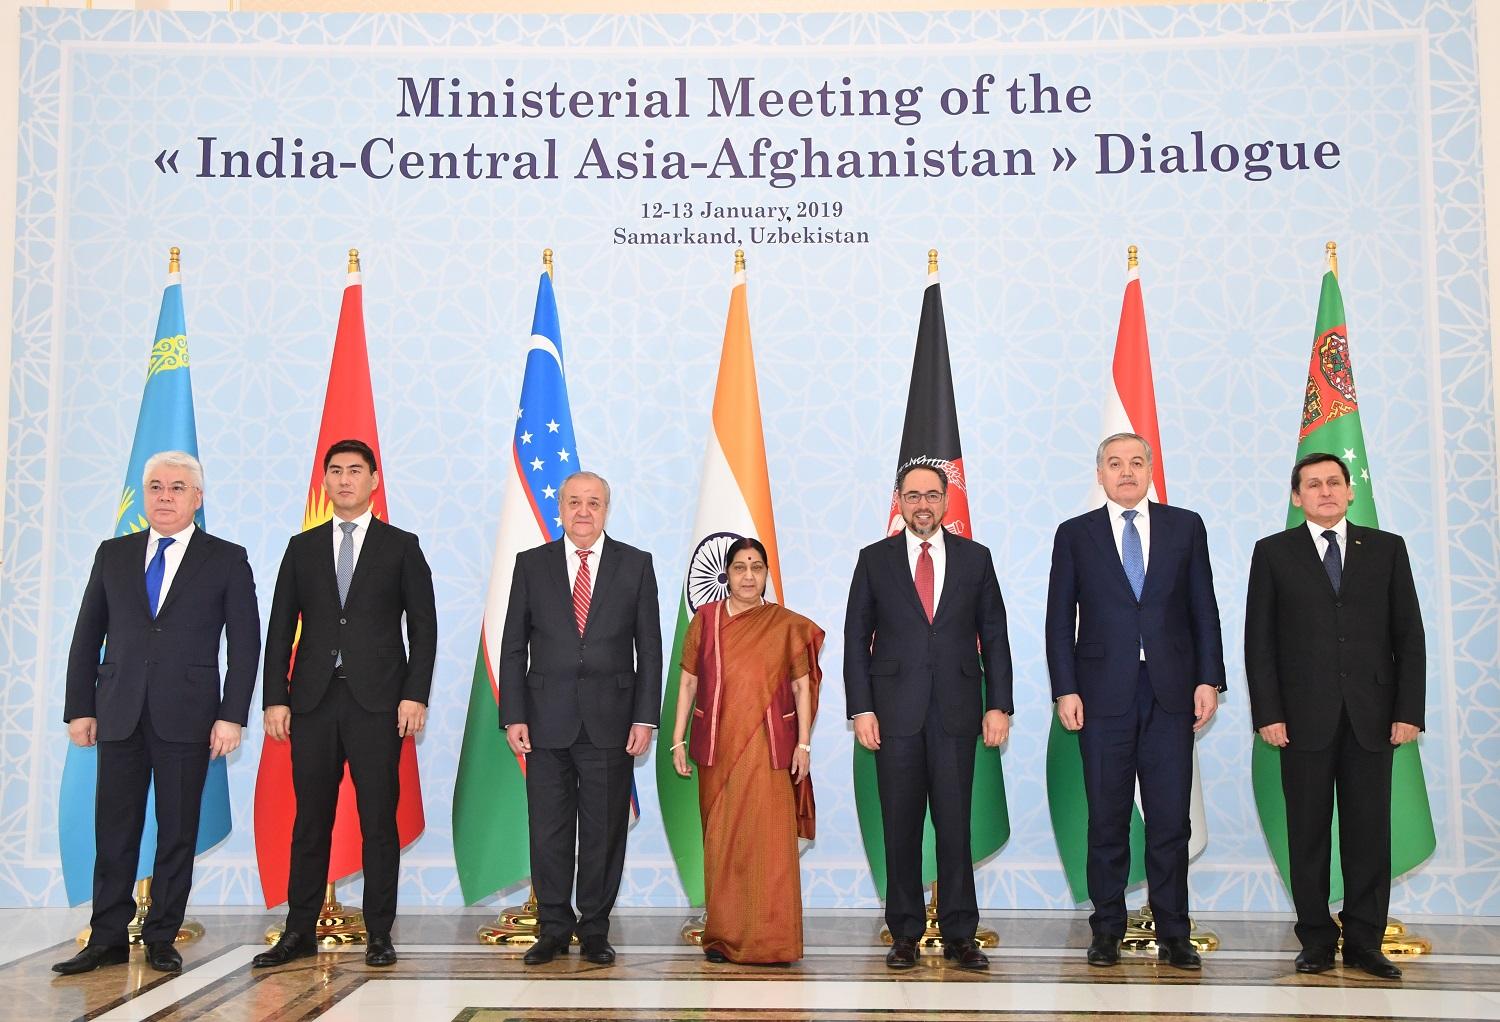 FMs of India - Central Asia dialogue with Afghanistan's participation make joint statement